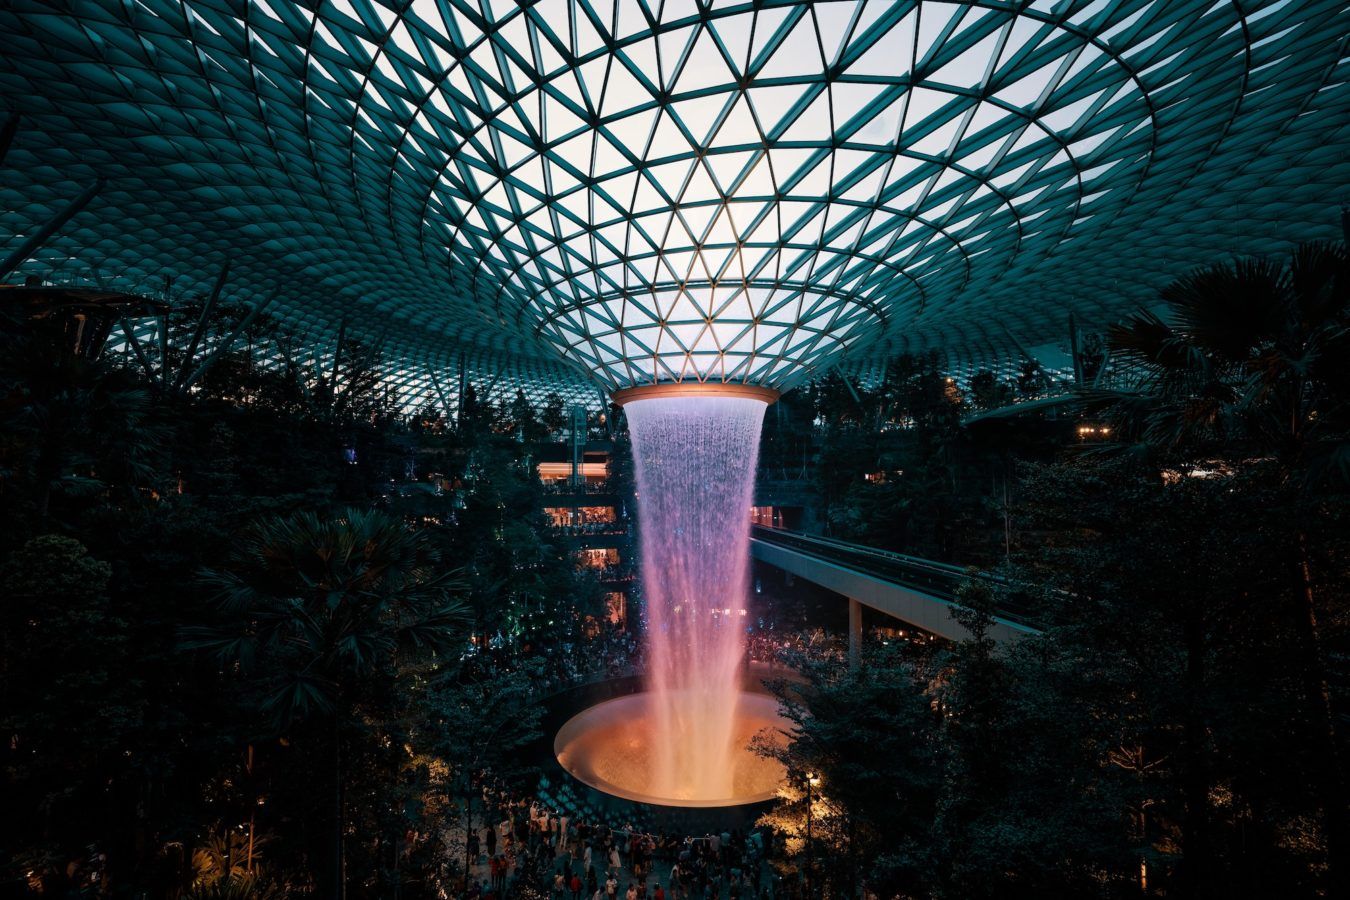 SIN: Singapore Airport Guide - Terminal map, lounges, bars, restaurants &  reviews with images